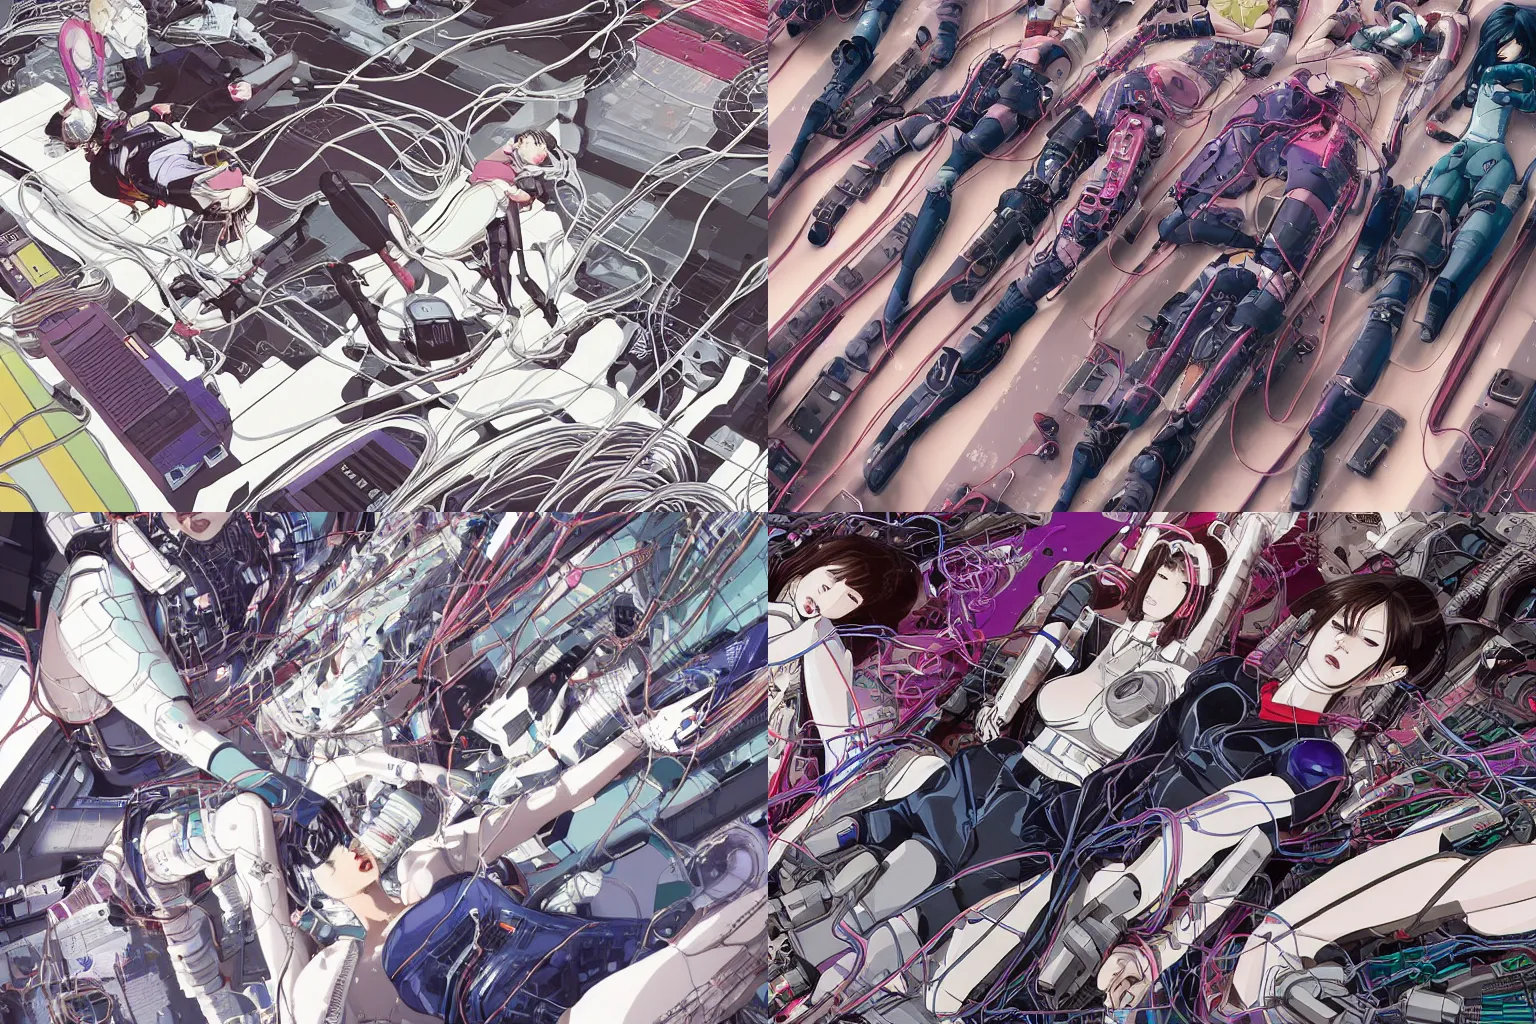 Prompt: a cyberpunk illustration of a group of super coherent female androids in style of yukito kishiro, lying on an abstract, empty, white floor with their body parts scattered around and cables and wires coming out, bymasamune shirow and katsuhiro otomo, hyper-detailed, intricate, colorful, view from above, wide angle, close up, beautiful